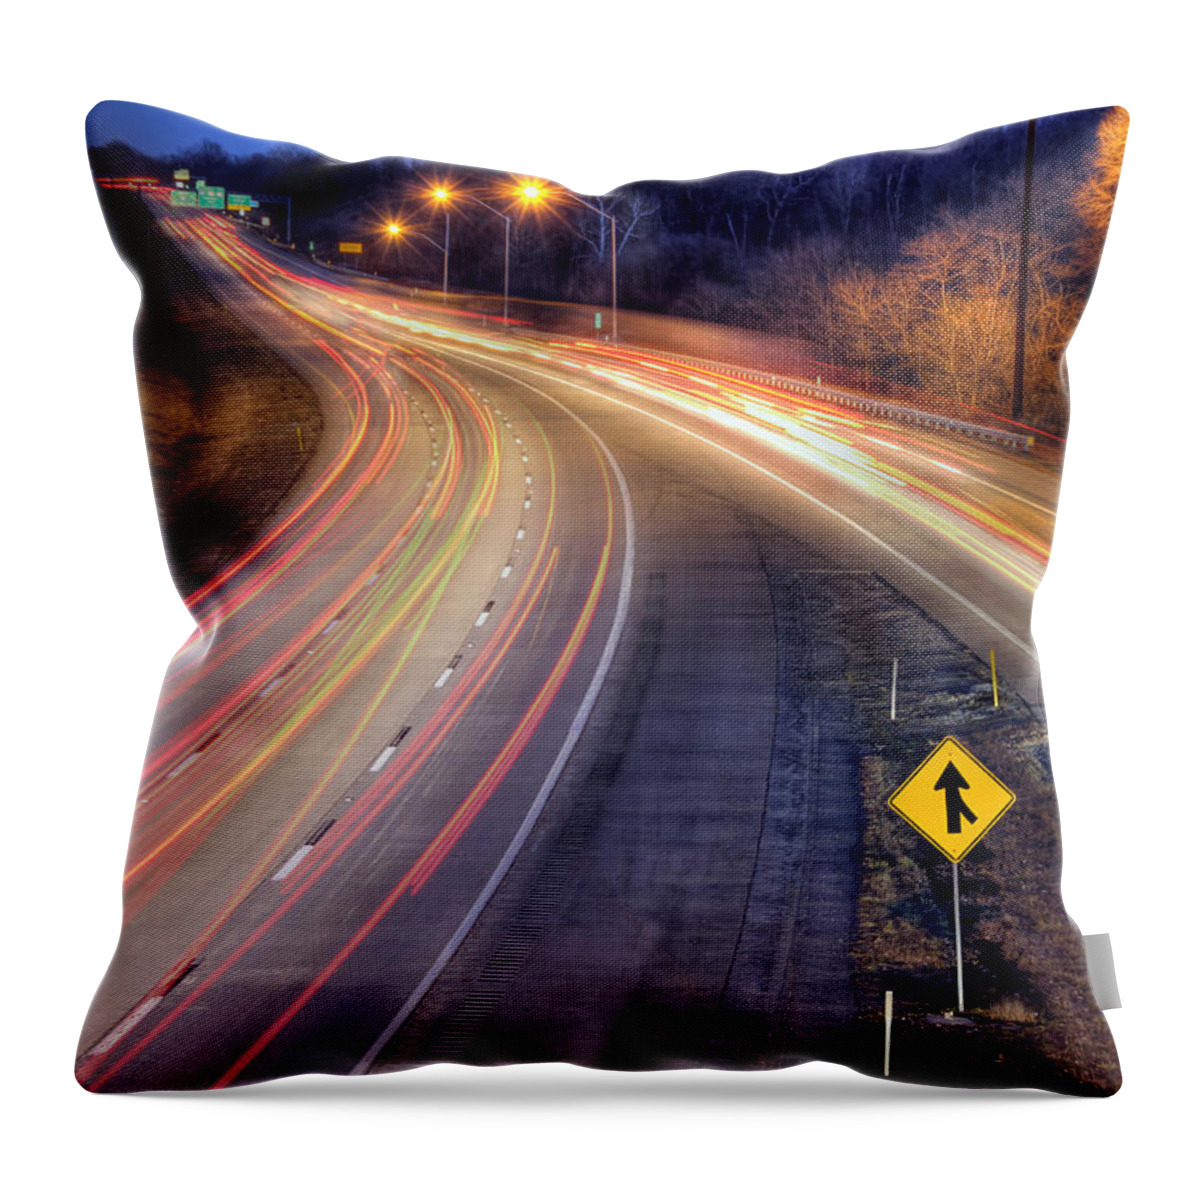 Night Throw Pillow featuring the photograph Drive by Lori Deiter